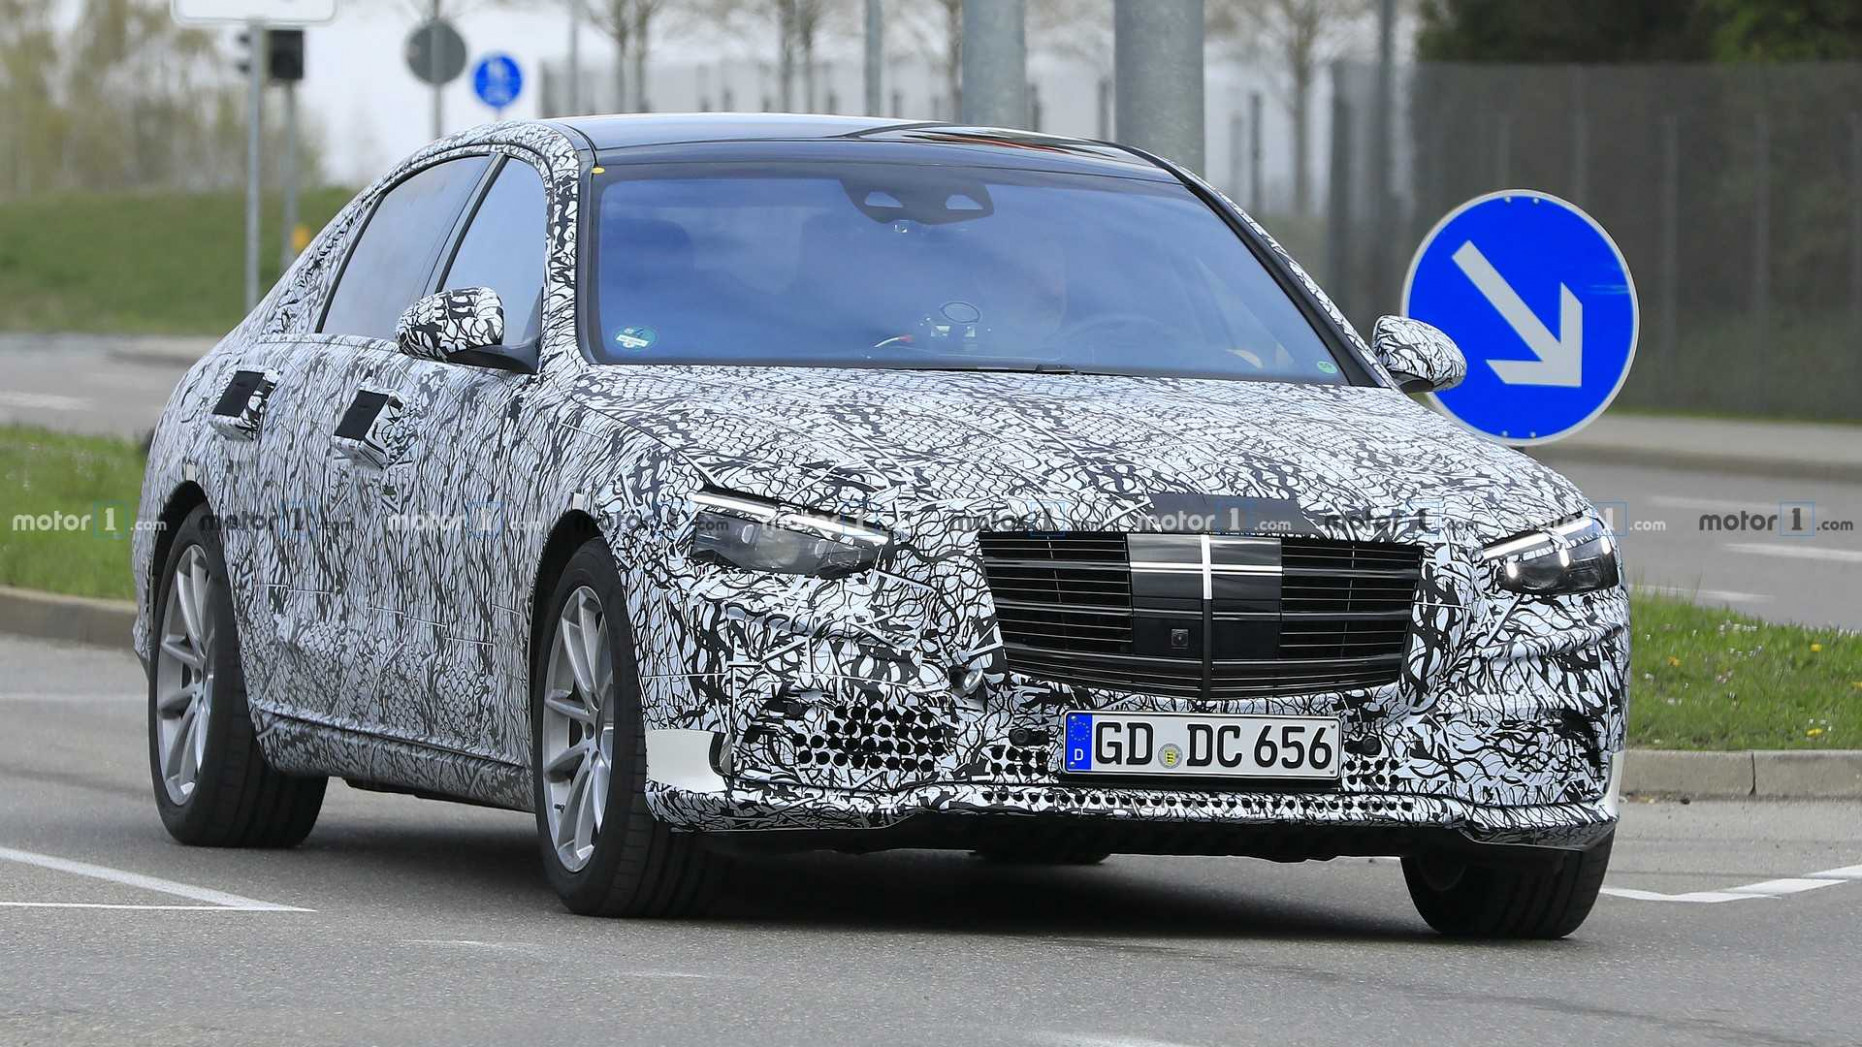 Performance and New Engine 2022 Mercedes-Benz S-Class